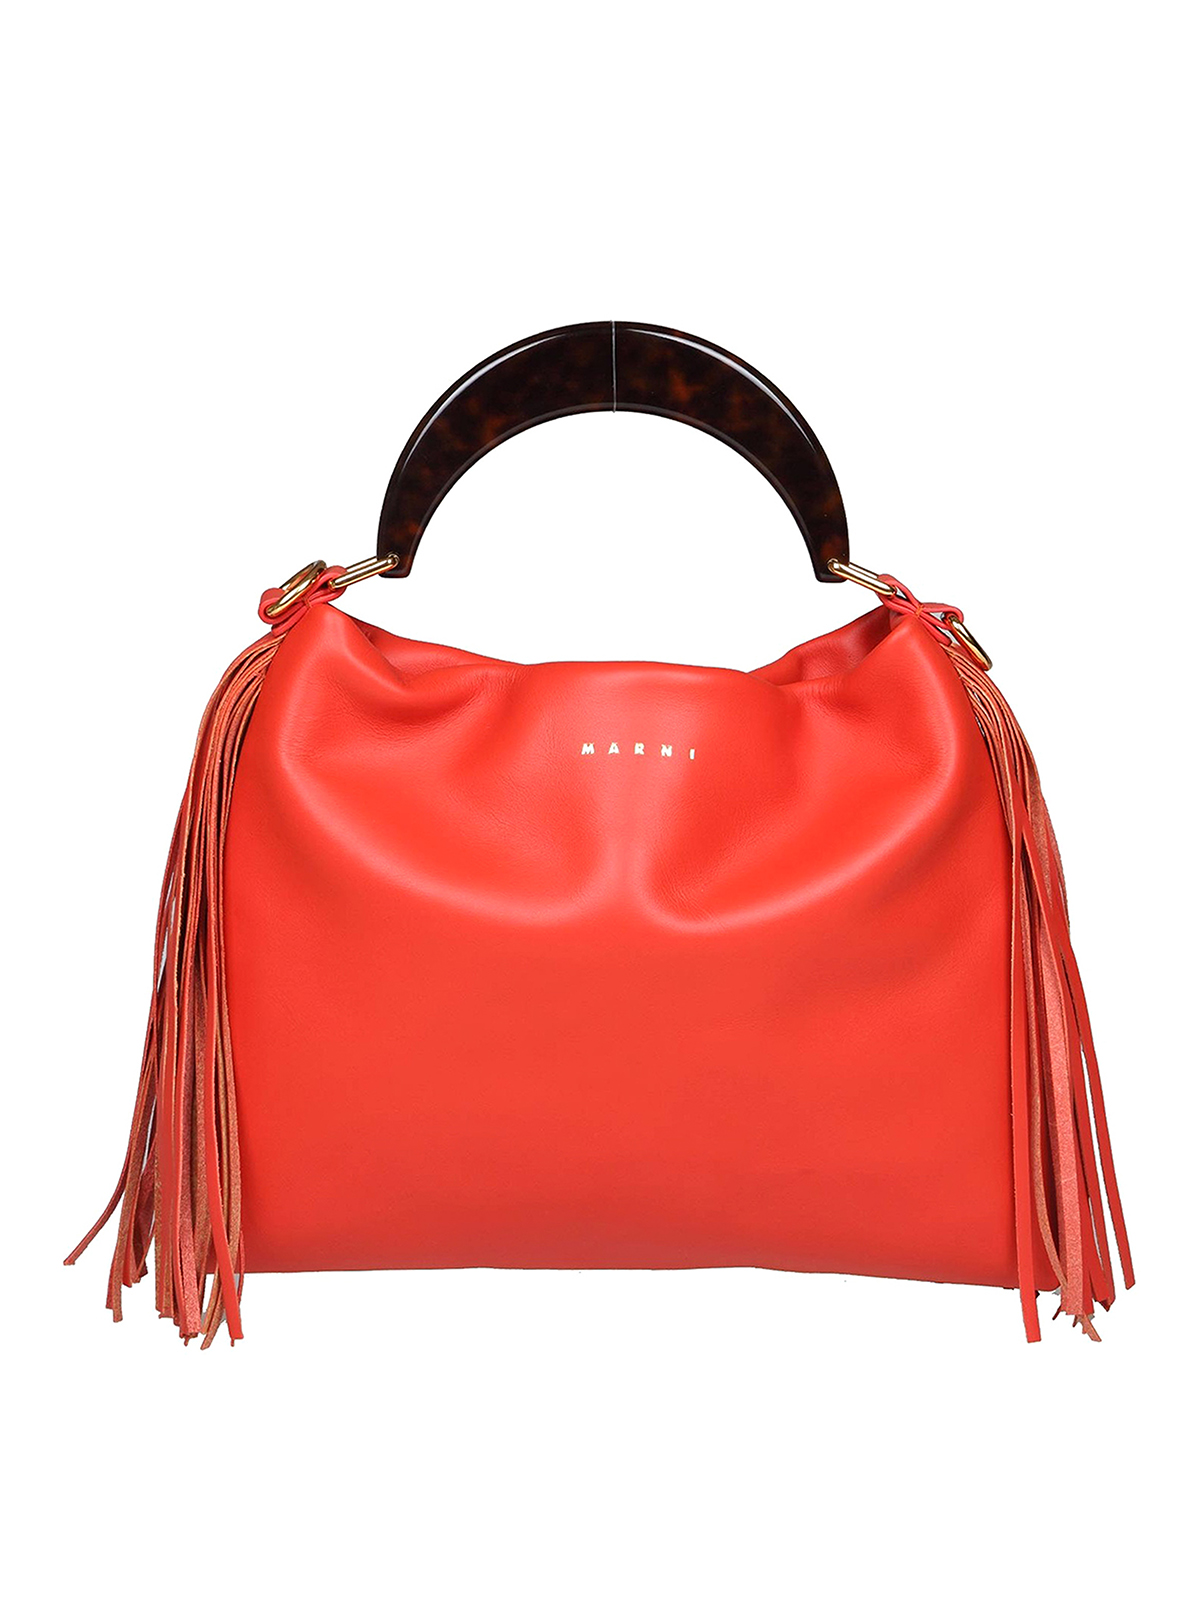 Marni Venice Leather Bag With Fringes In Red